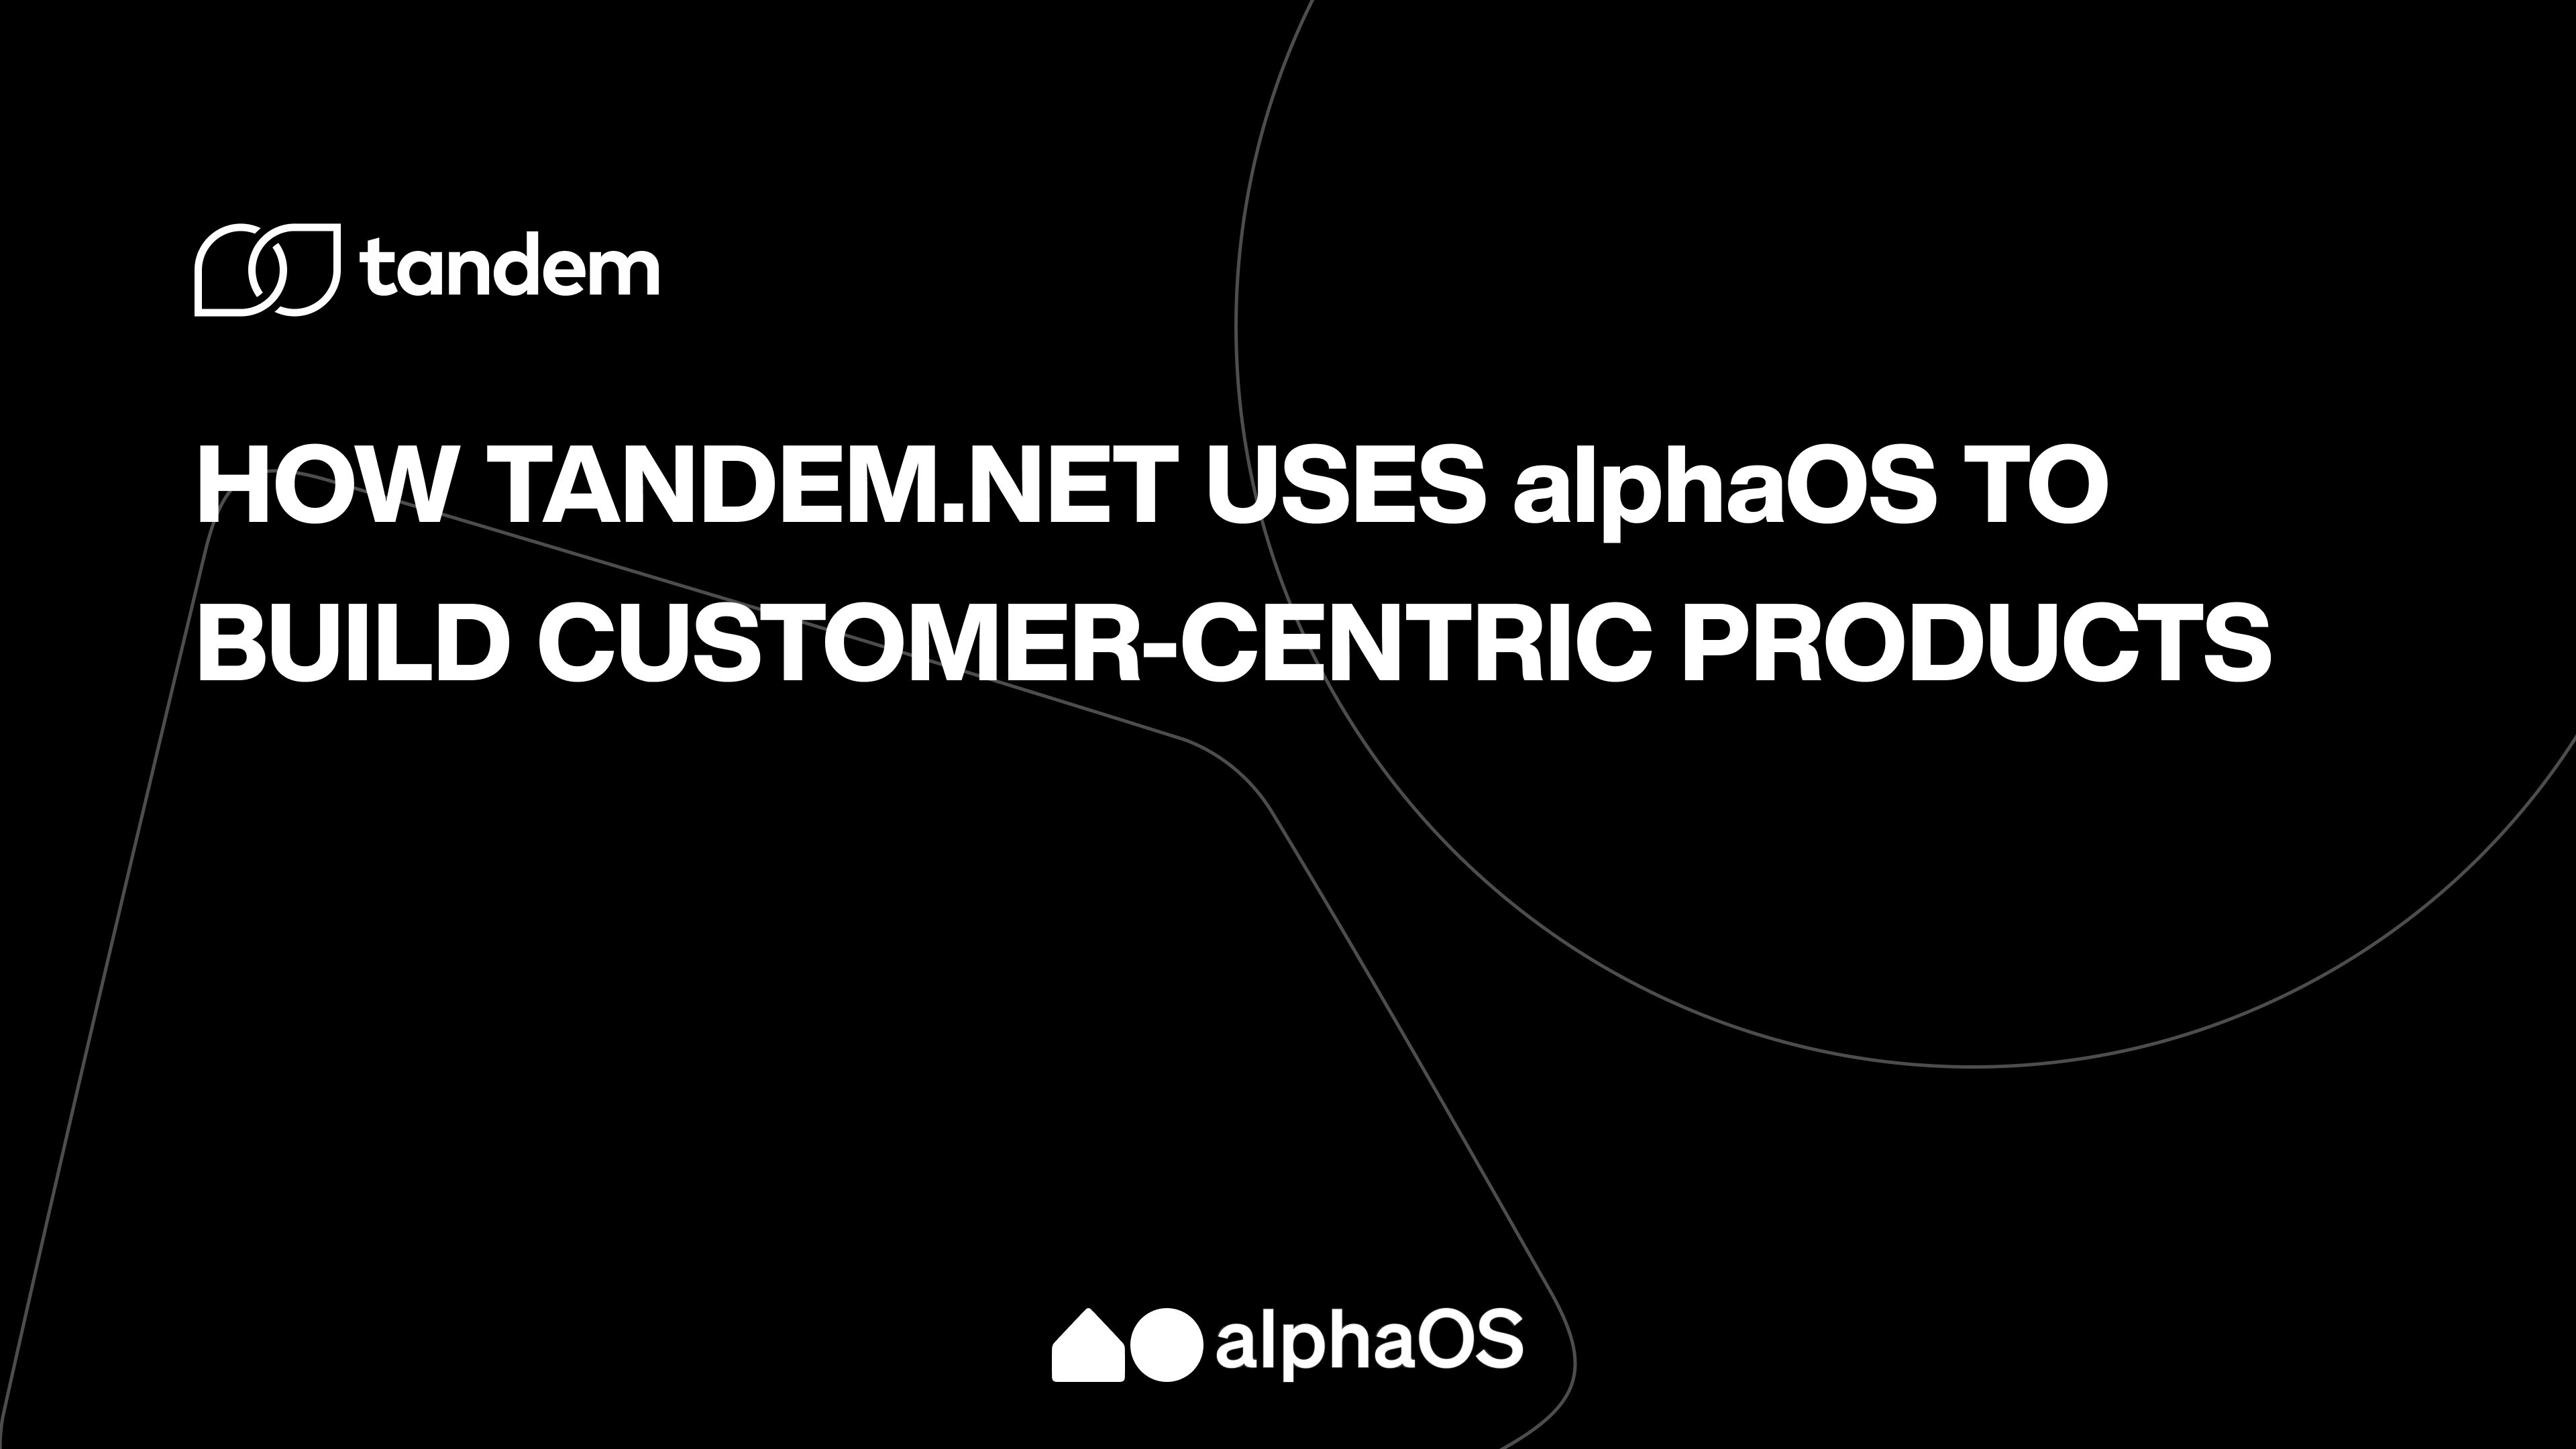 How Tandem.net uses alphaOS to build customer-centric products